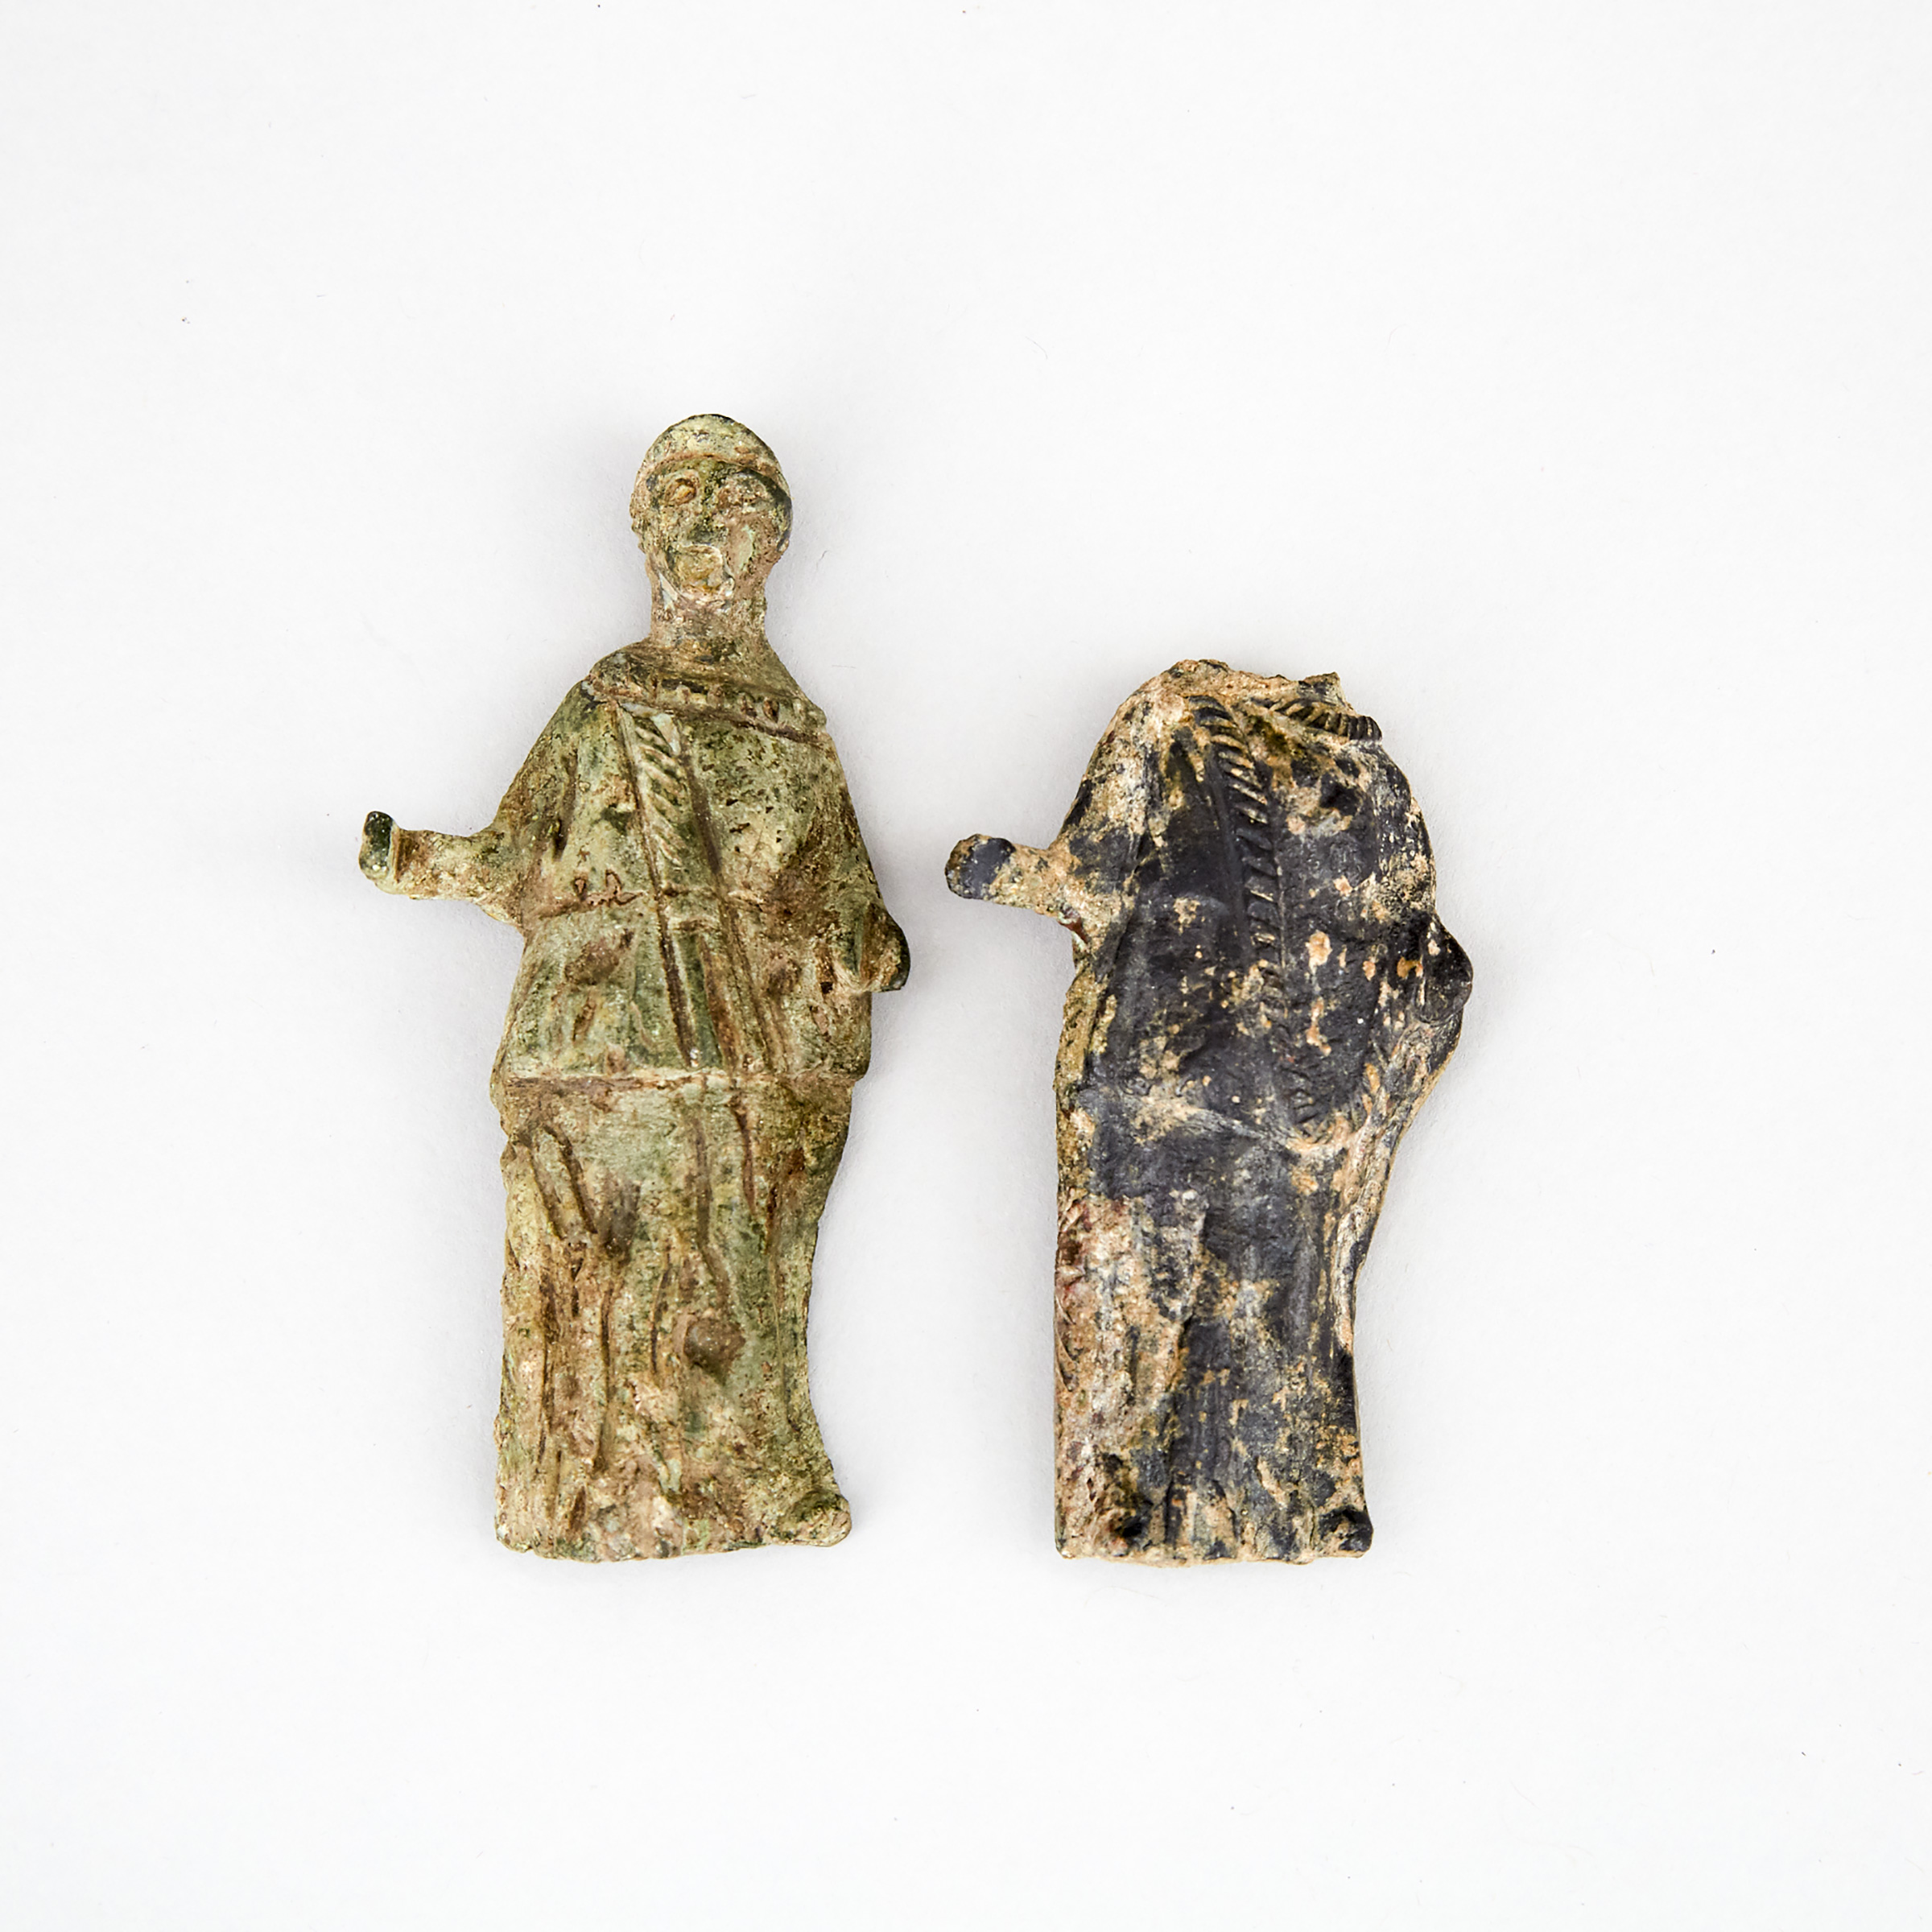 Two Roman Bronze Figures of Athena, 1st-2nd century A.D.